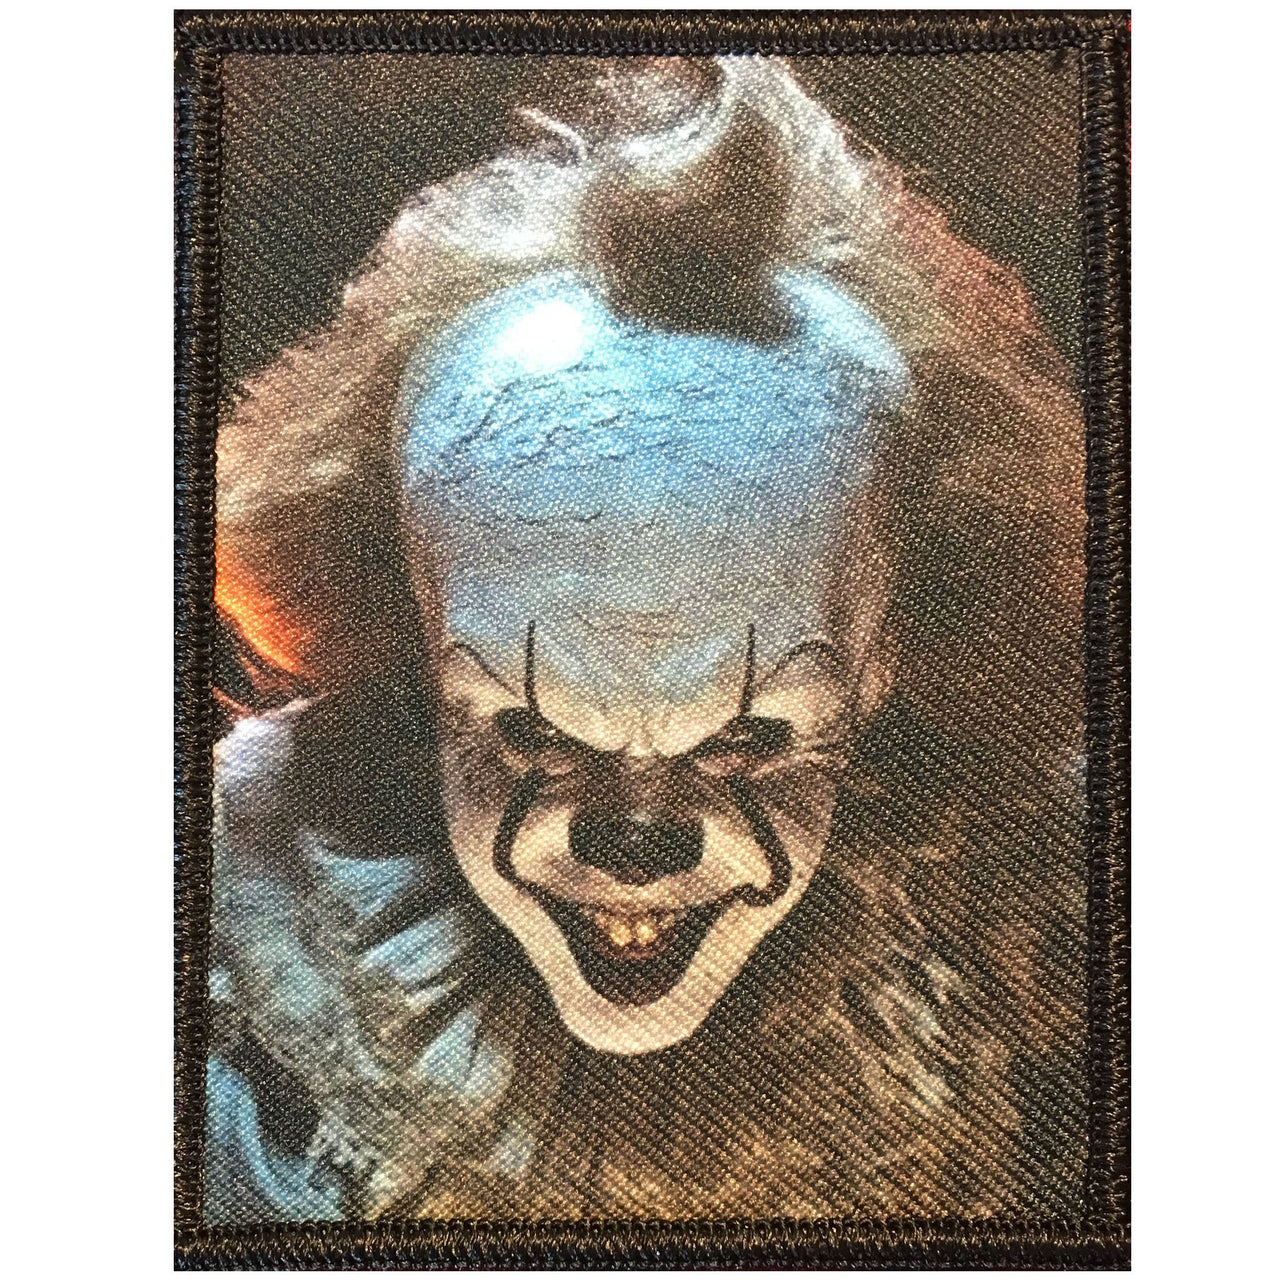 It Pennywise Remake Patch